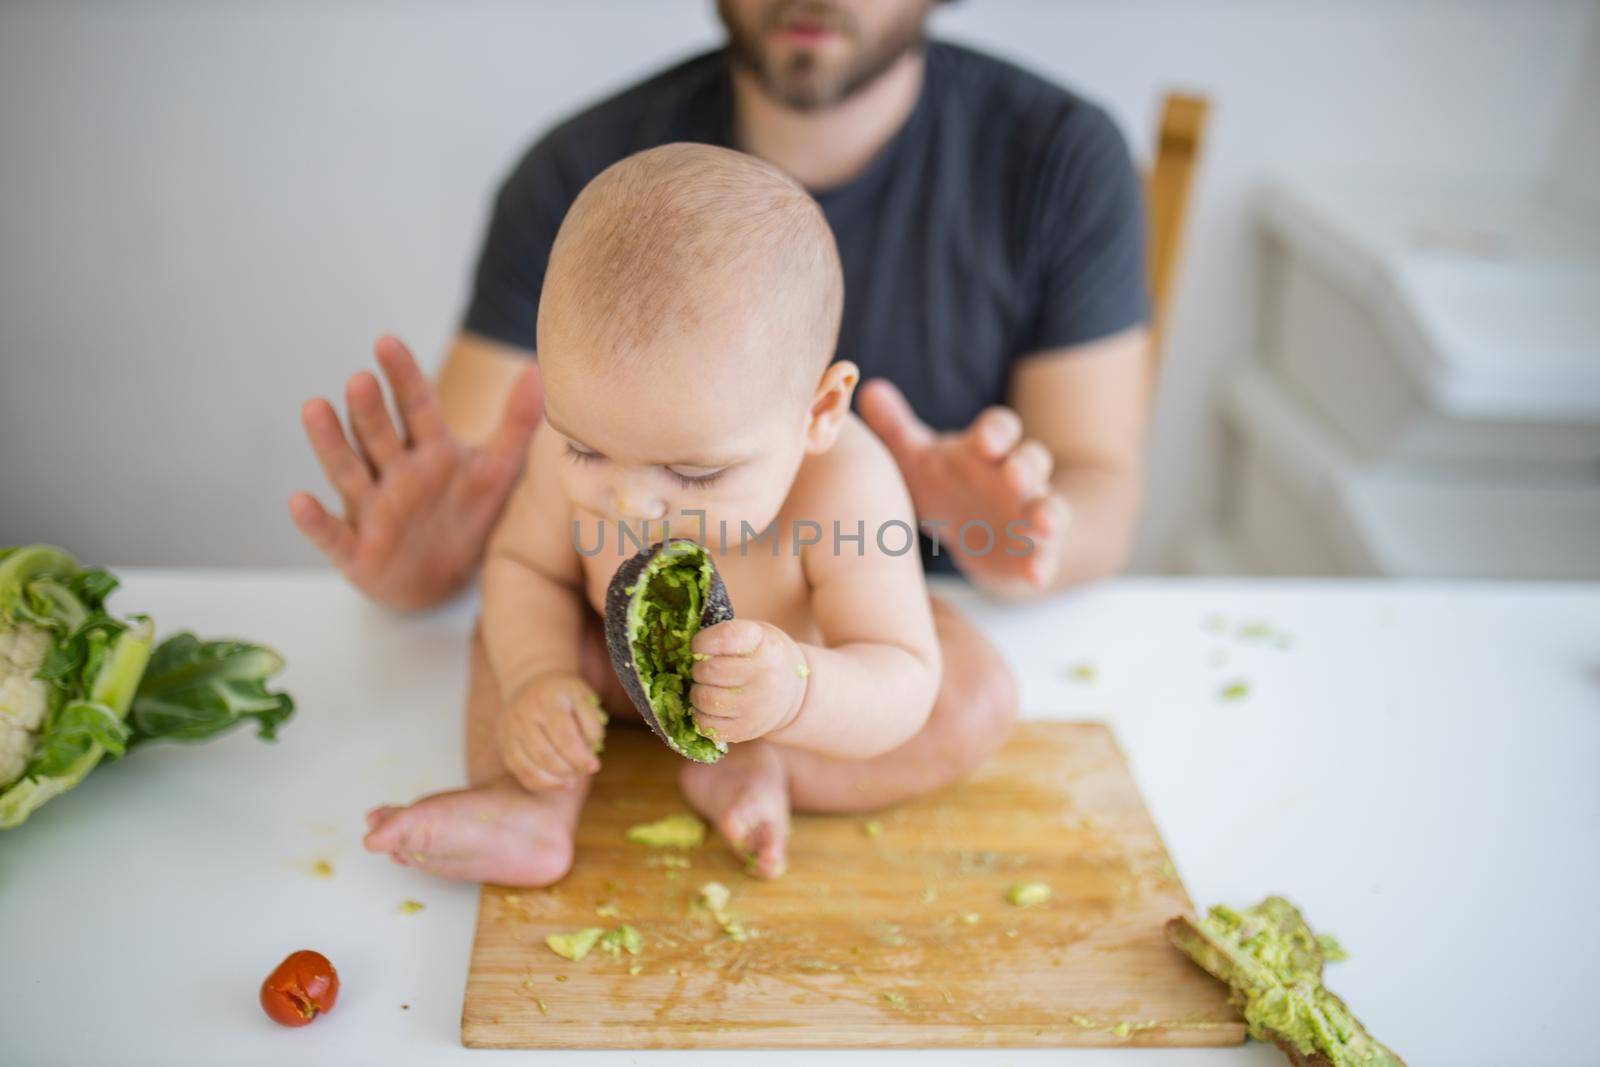 Happy baby sitting on a wooden board and biting an avocado peel by Kanelbulle